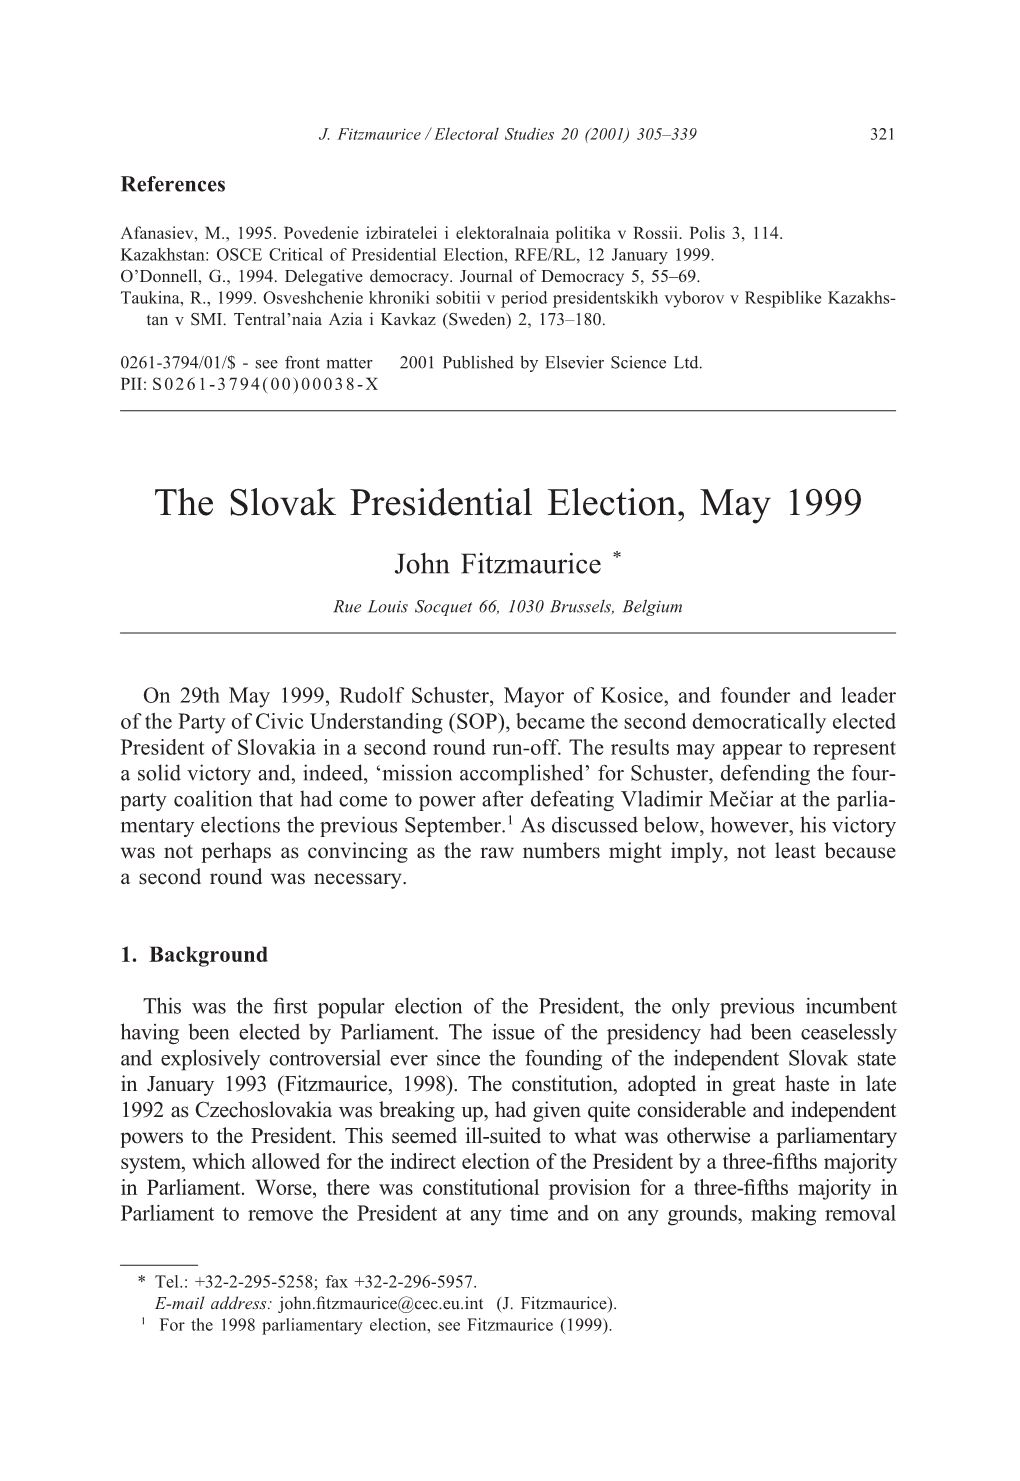 The Slovak Presidential Election, May 1999 John Fitzmaurice *